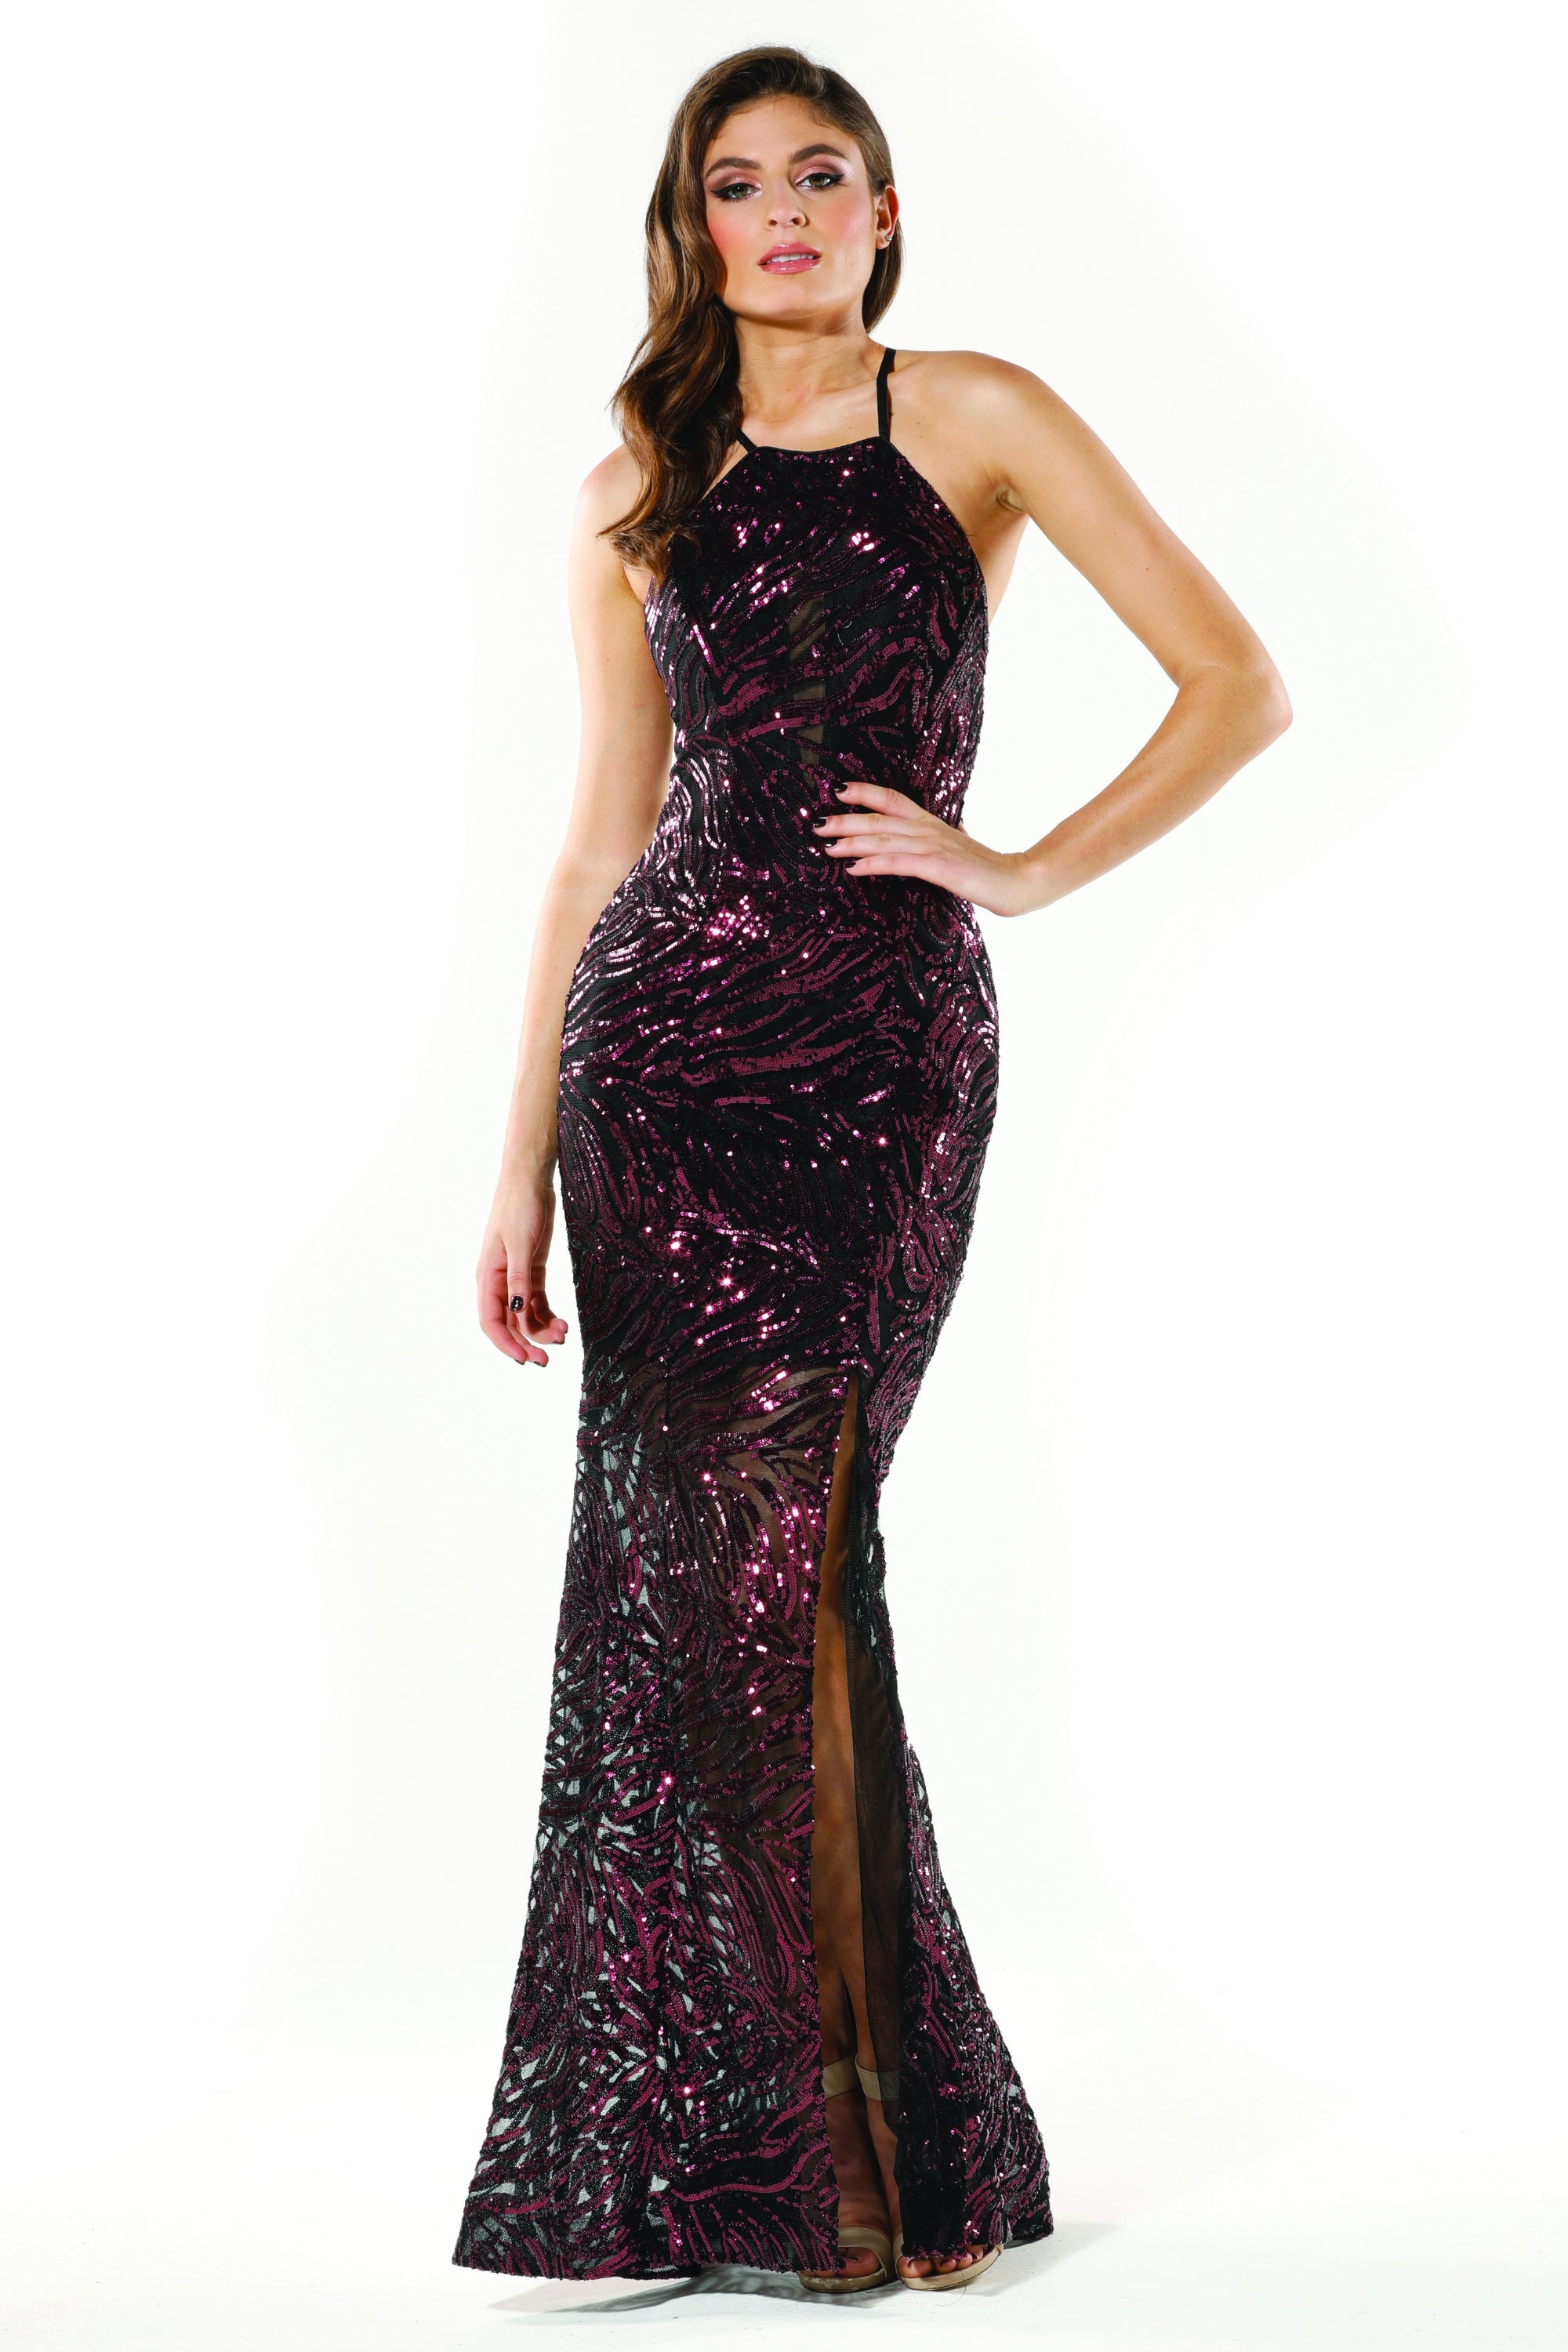 Tinaholy Couture Designer T19112 Berry Sequin Formal Prom Dress Tina Holly Couture$ AfterPay Humm ZipPay LayBuy Sezzle